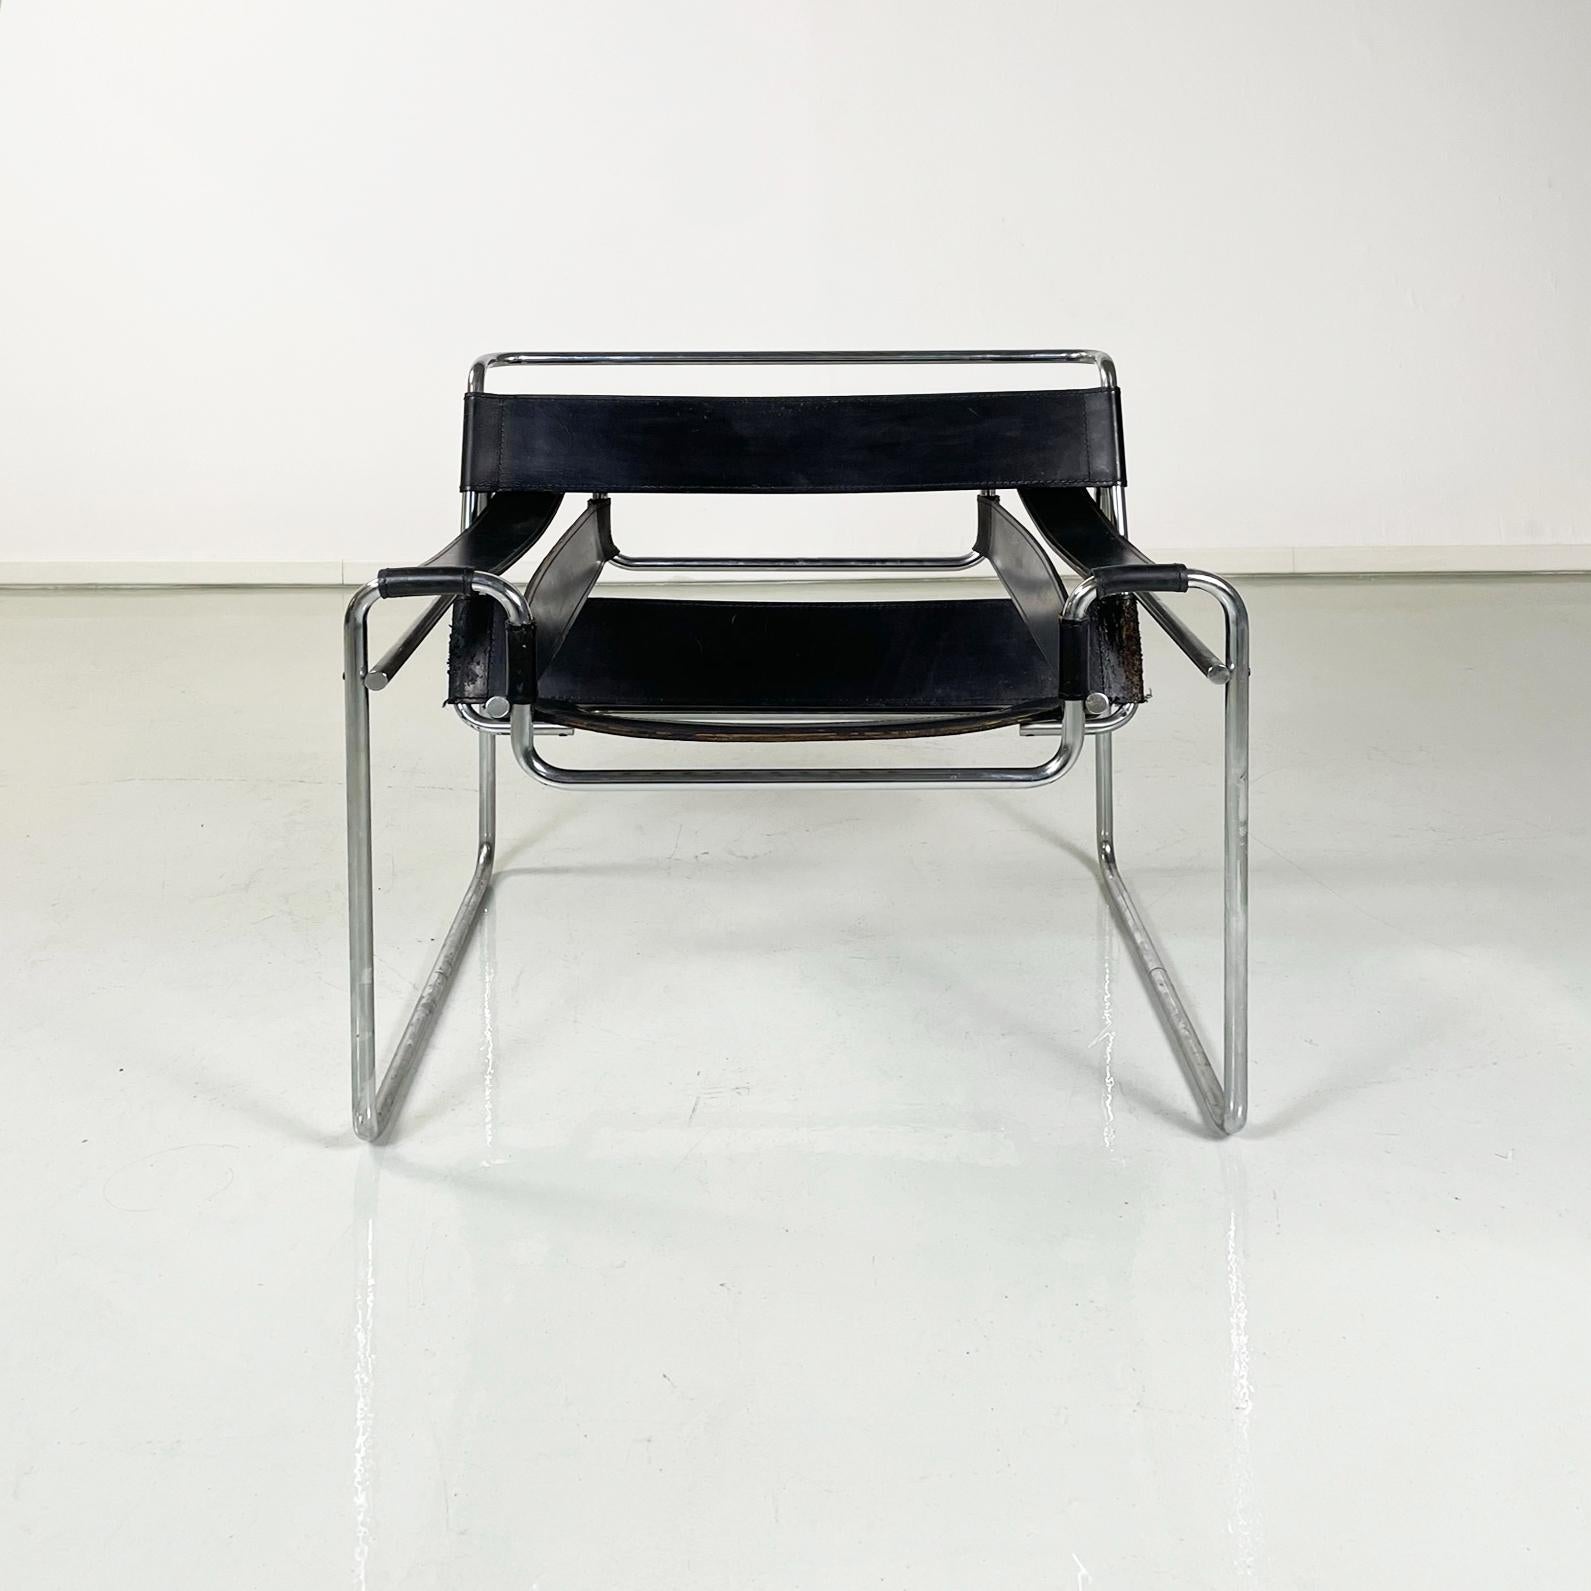 Italian modern black armchair mod. Wassily B3 by Marcel Breuer for Gavina, 1960s.
Iconic armchair mod. Wassily, also known as model B3, with rectangular seat in black leather. The structure, which supports the various leather parts, is in chromed